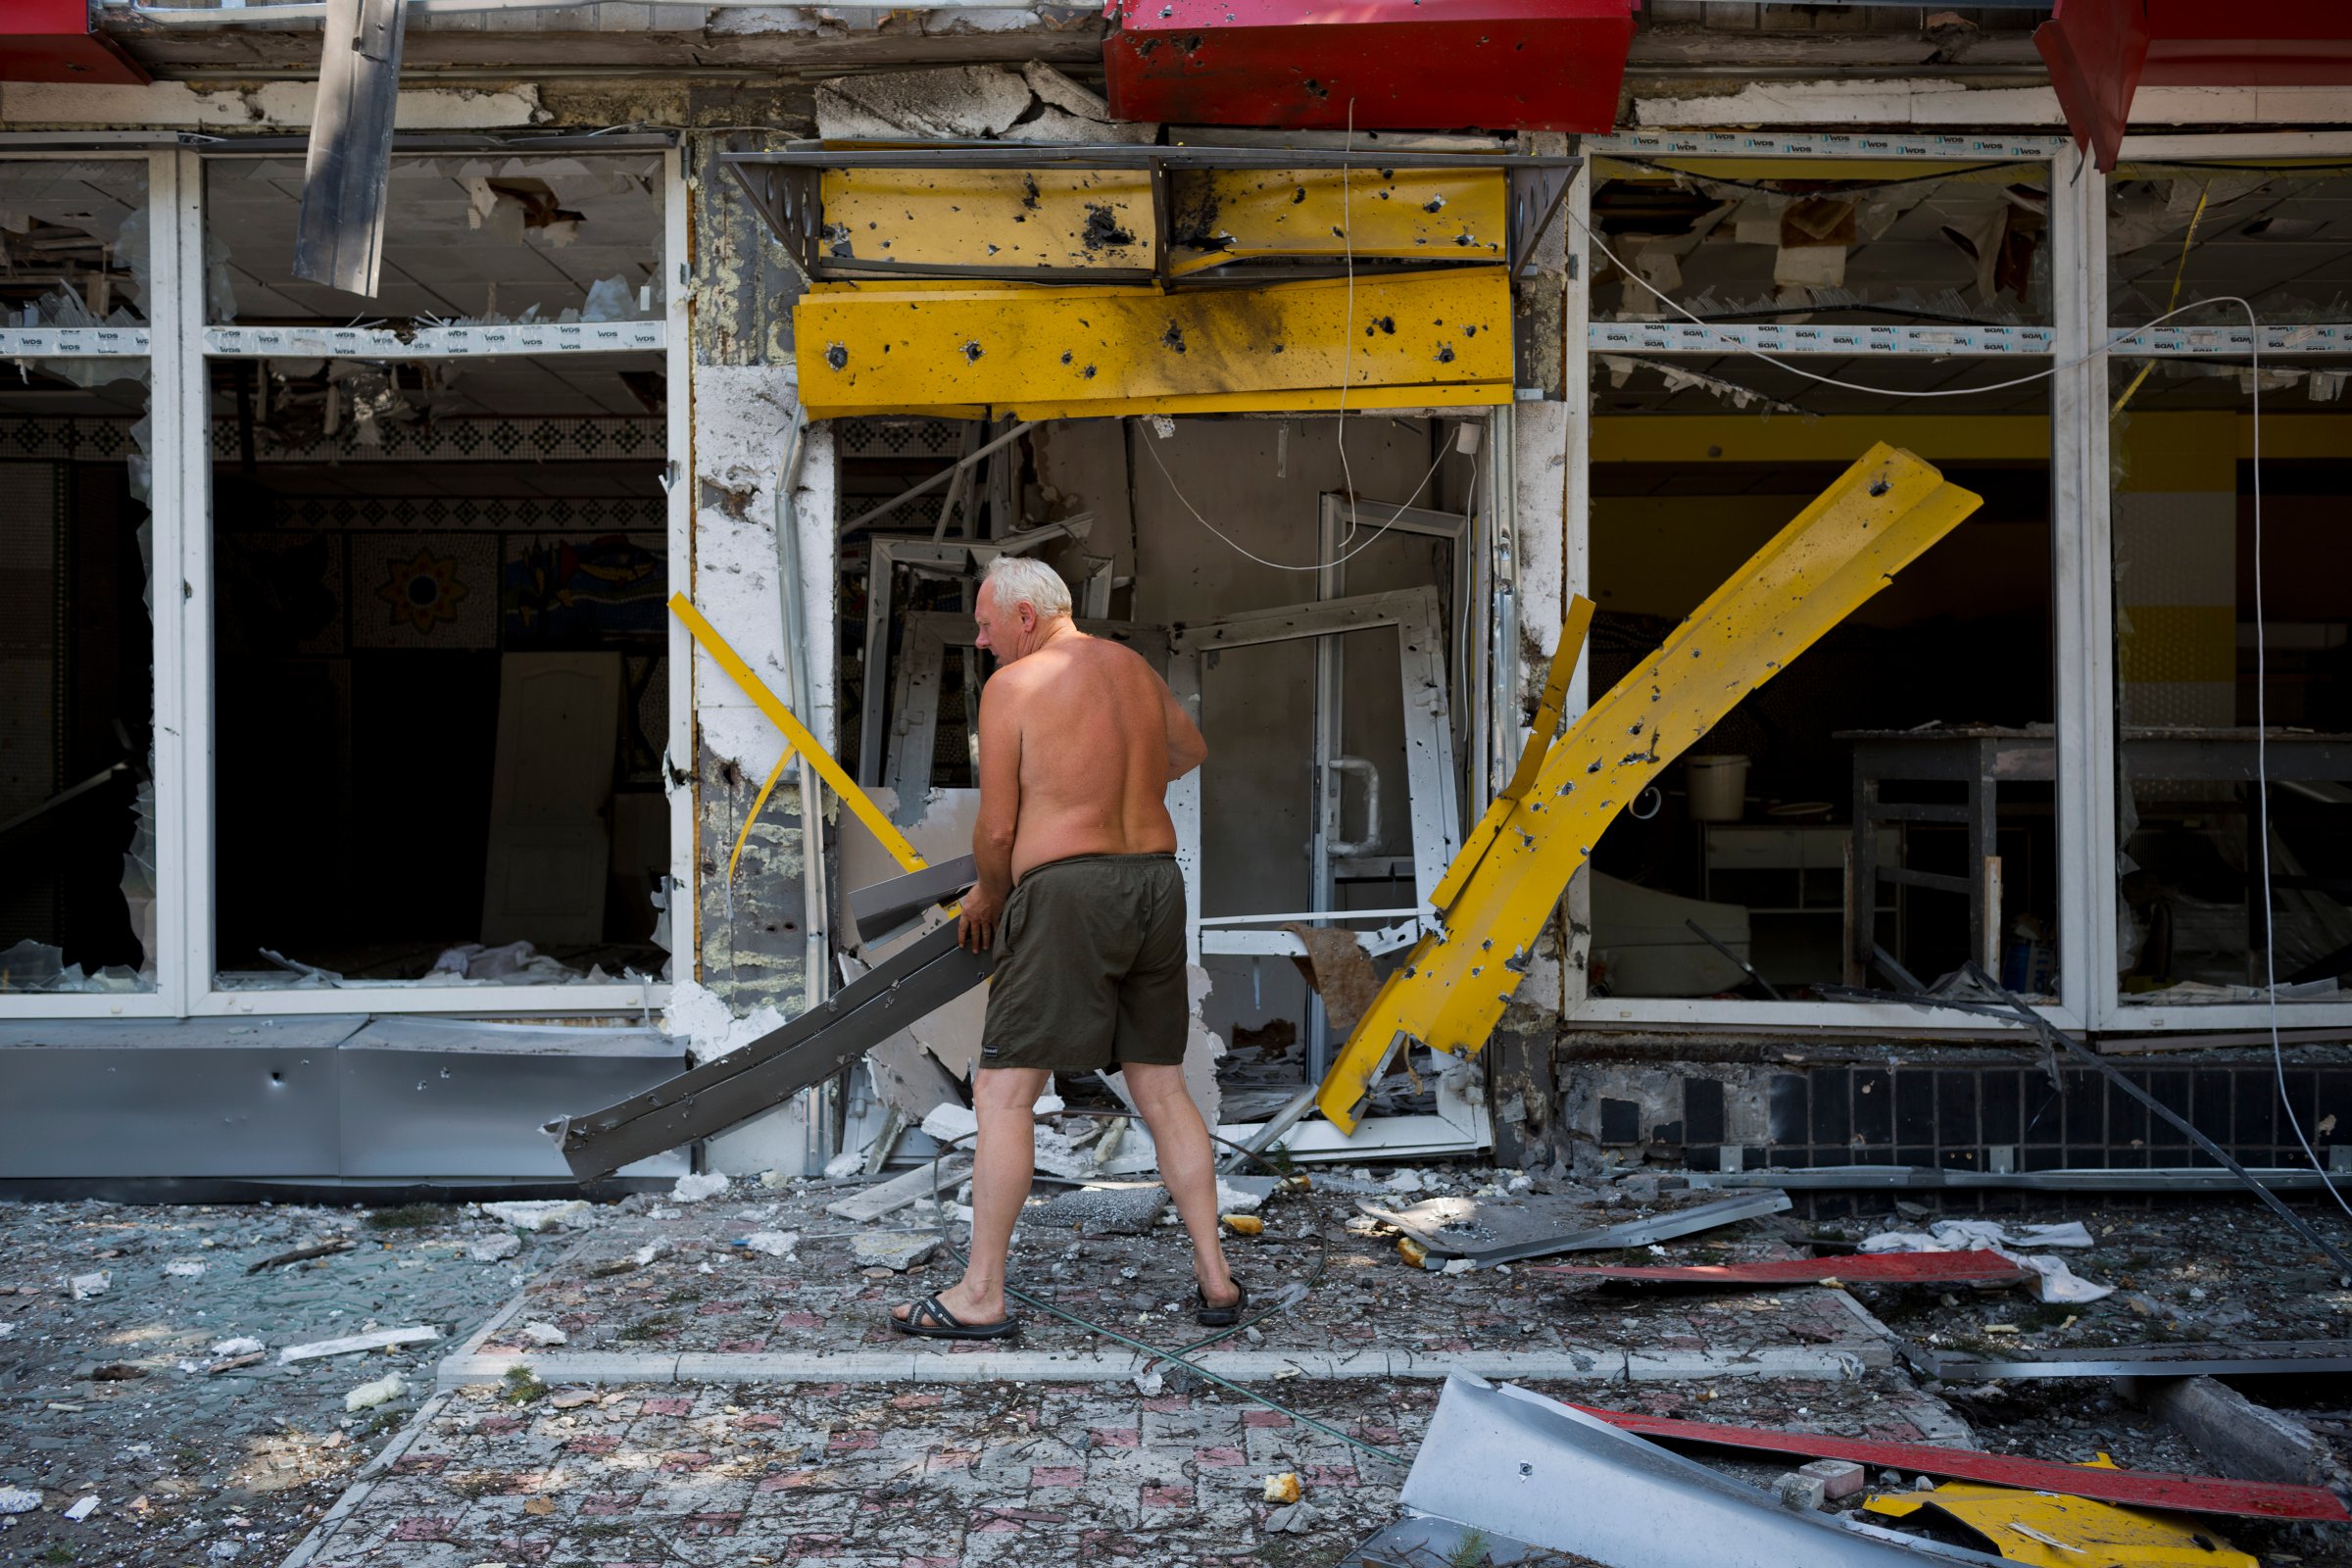 A man clears debris as the Ukrainian army retakes a village from pro-Russian rebels onAugust 13, 2014 in Uglegorsk. Ukraine.